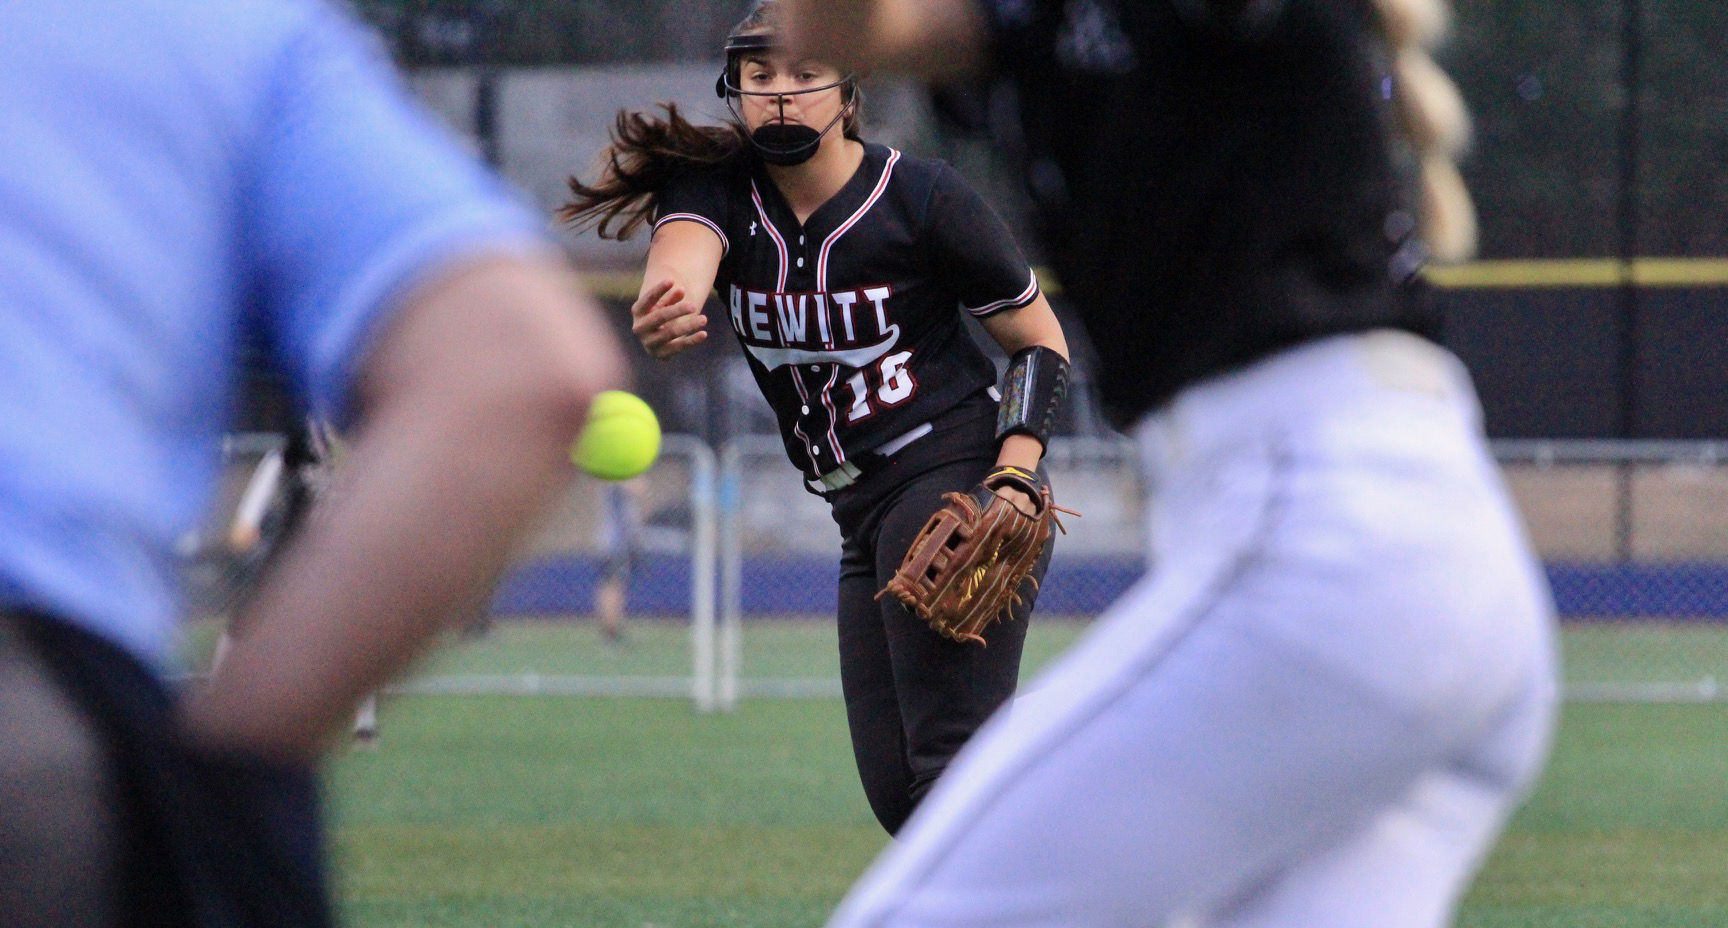 HTHS softball's offense continues blistering pace during Spain Park Classic run; Huskies fall just short in championship clash of 2 nationally ranked teams